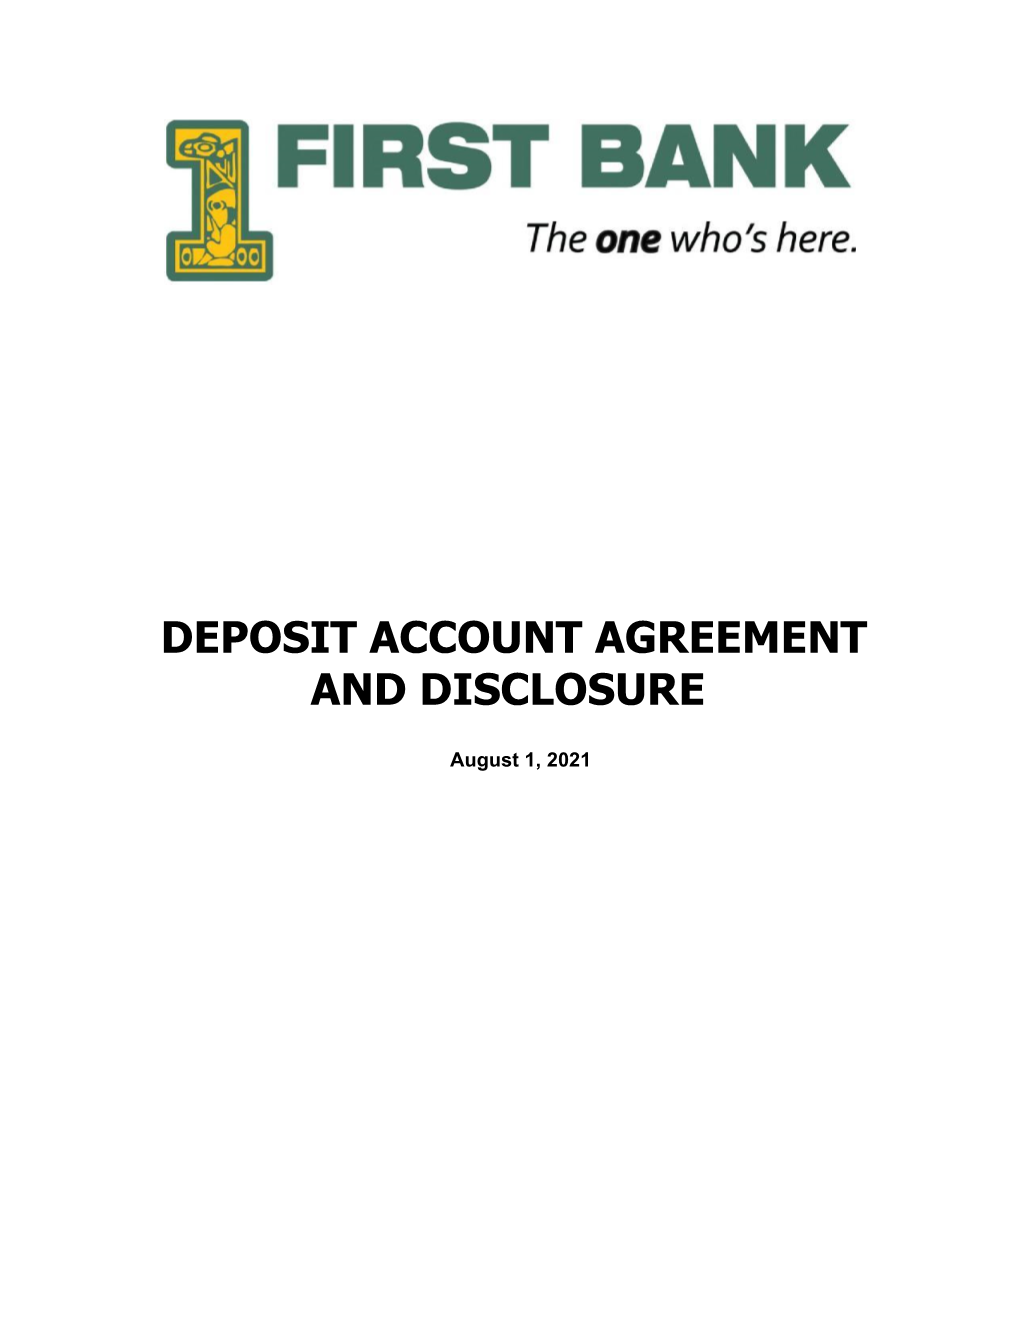 Deposit Account Agreement and Disclosure